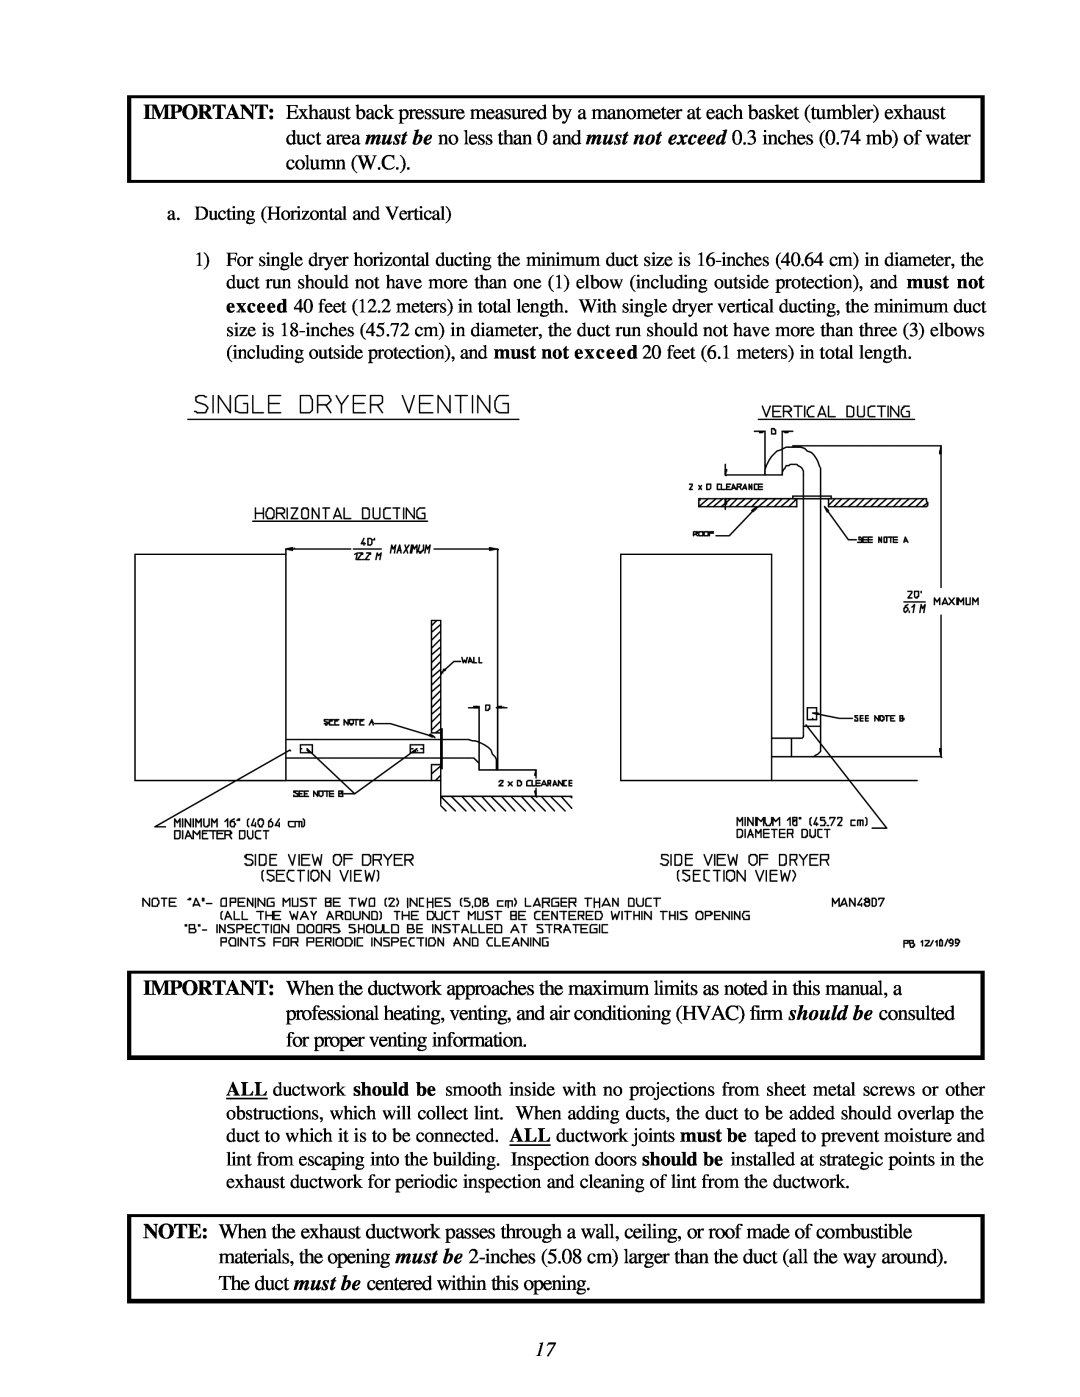 American Dryer Corp ML-122D installation manual a. Ducting Horizontal and Vertical 